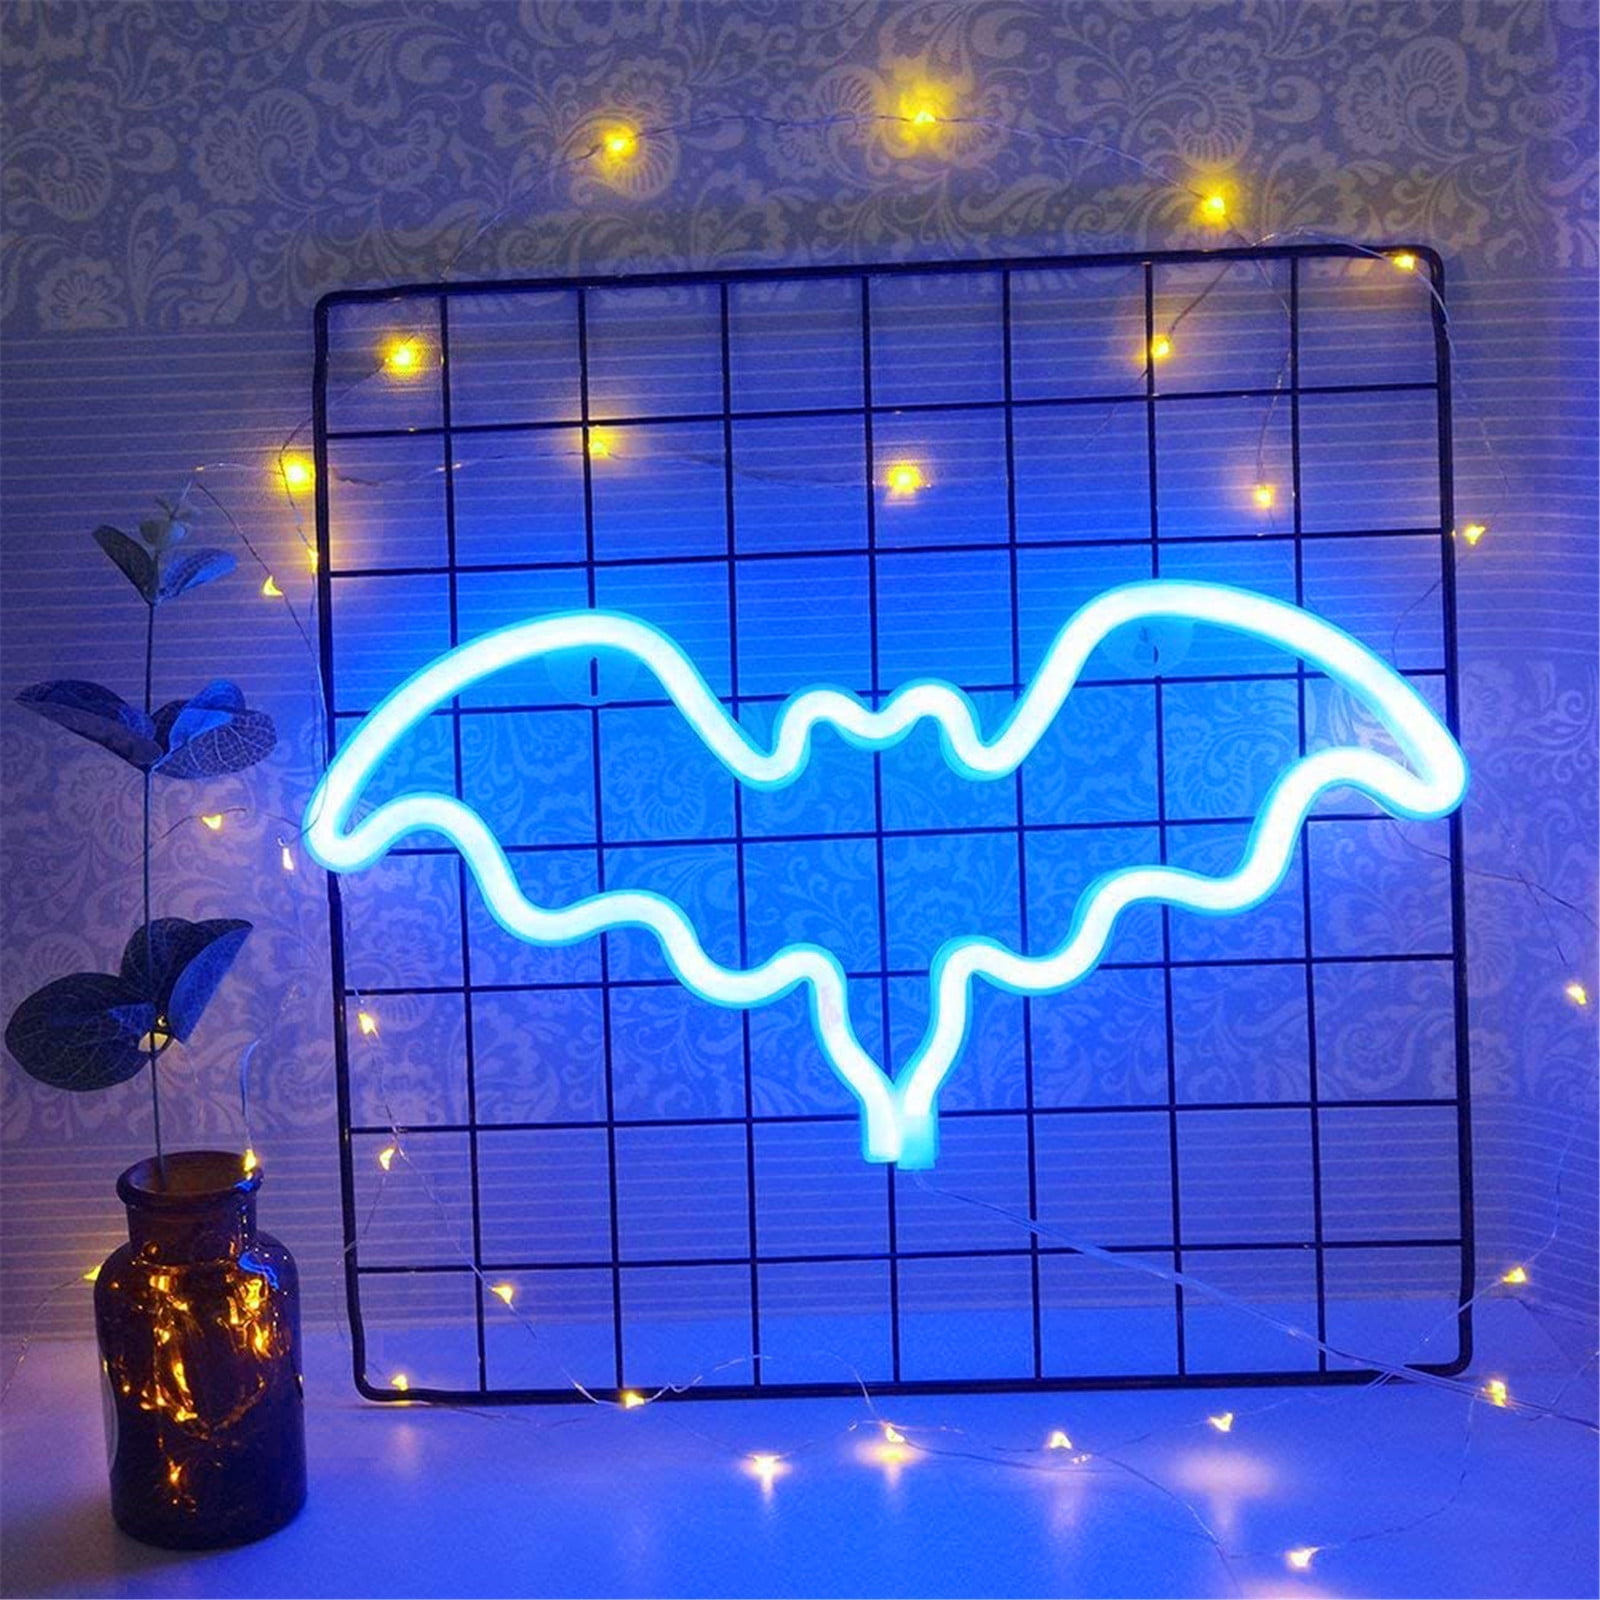  Halloween Bat Neon Signs, Bat Neon Light Sign for Bedroom Wall  Decor, USB Powered Light up Sign with Base, Bat LED Signs Room Decor  Aesthetic for Halloween Decoration, Gift, 9.45×6.69 